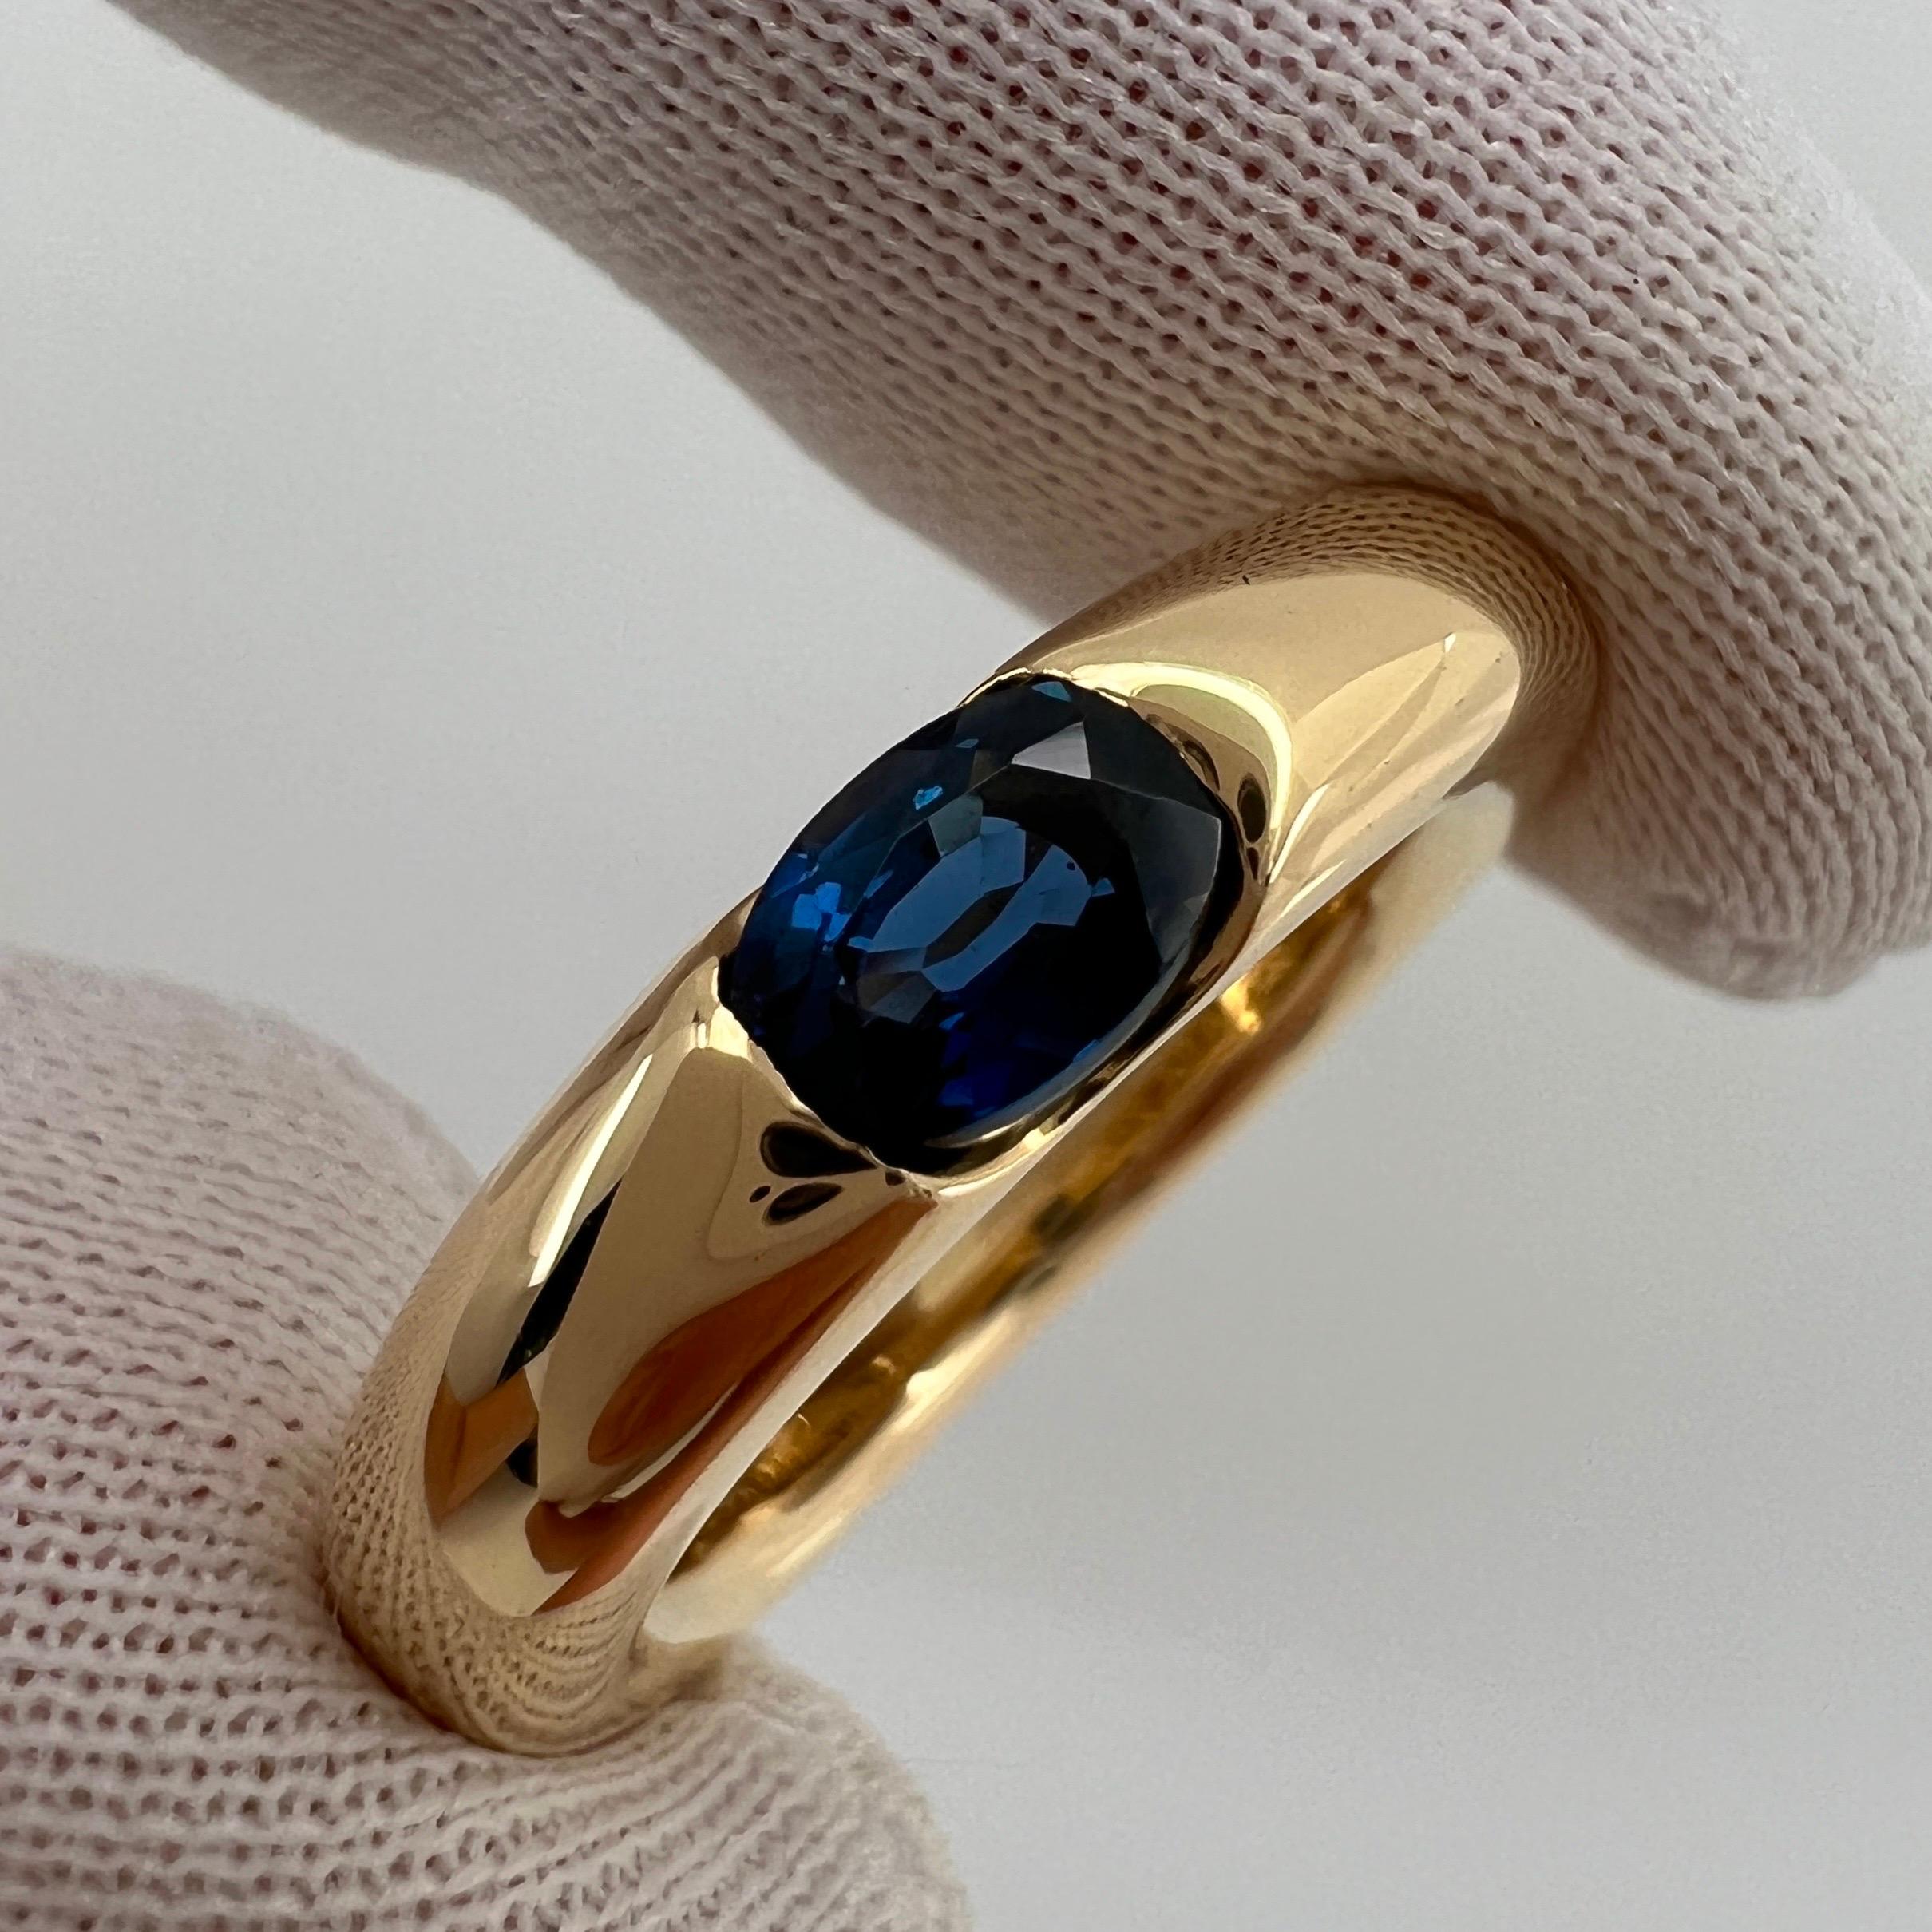 Vintage Cartier Deep Blue Sapphire Oval Ellipse 18k Yellow Gold Solitaire Ring 7